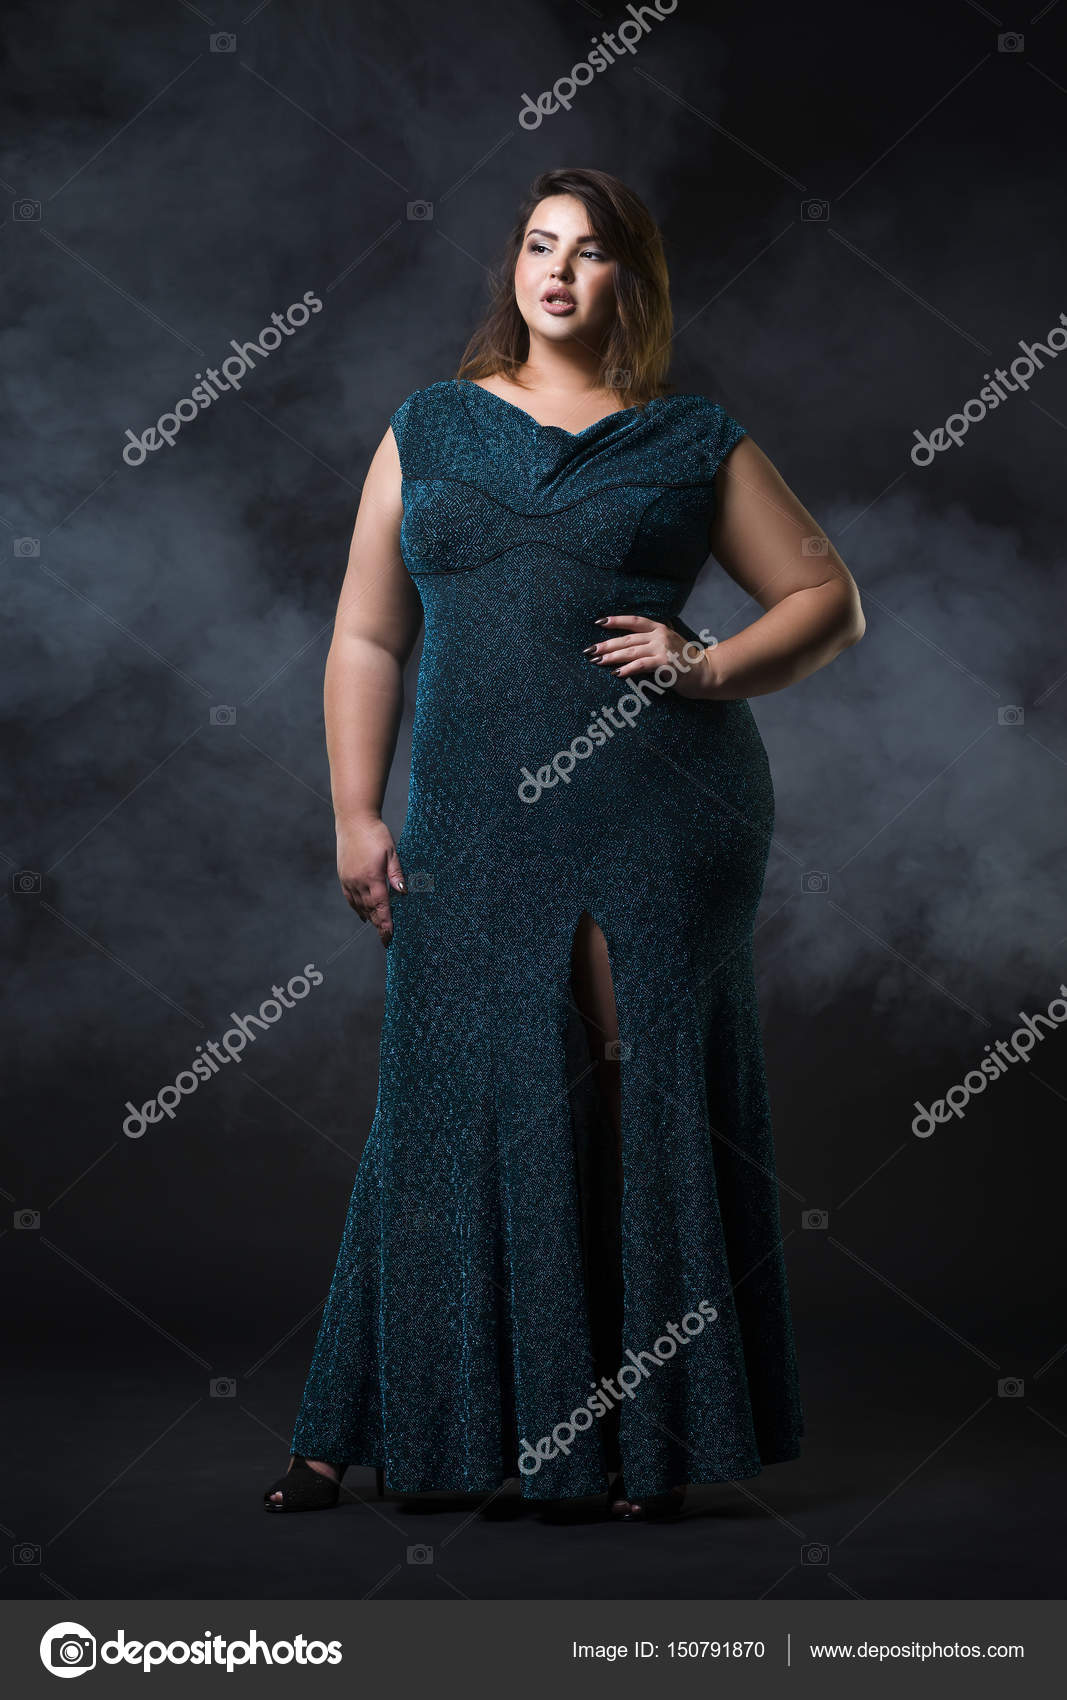 Top Tips for Finding the Best Formal Dress for Your Body Type – The Dress  Outlet